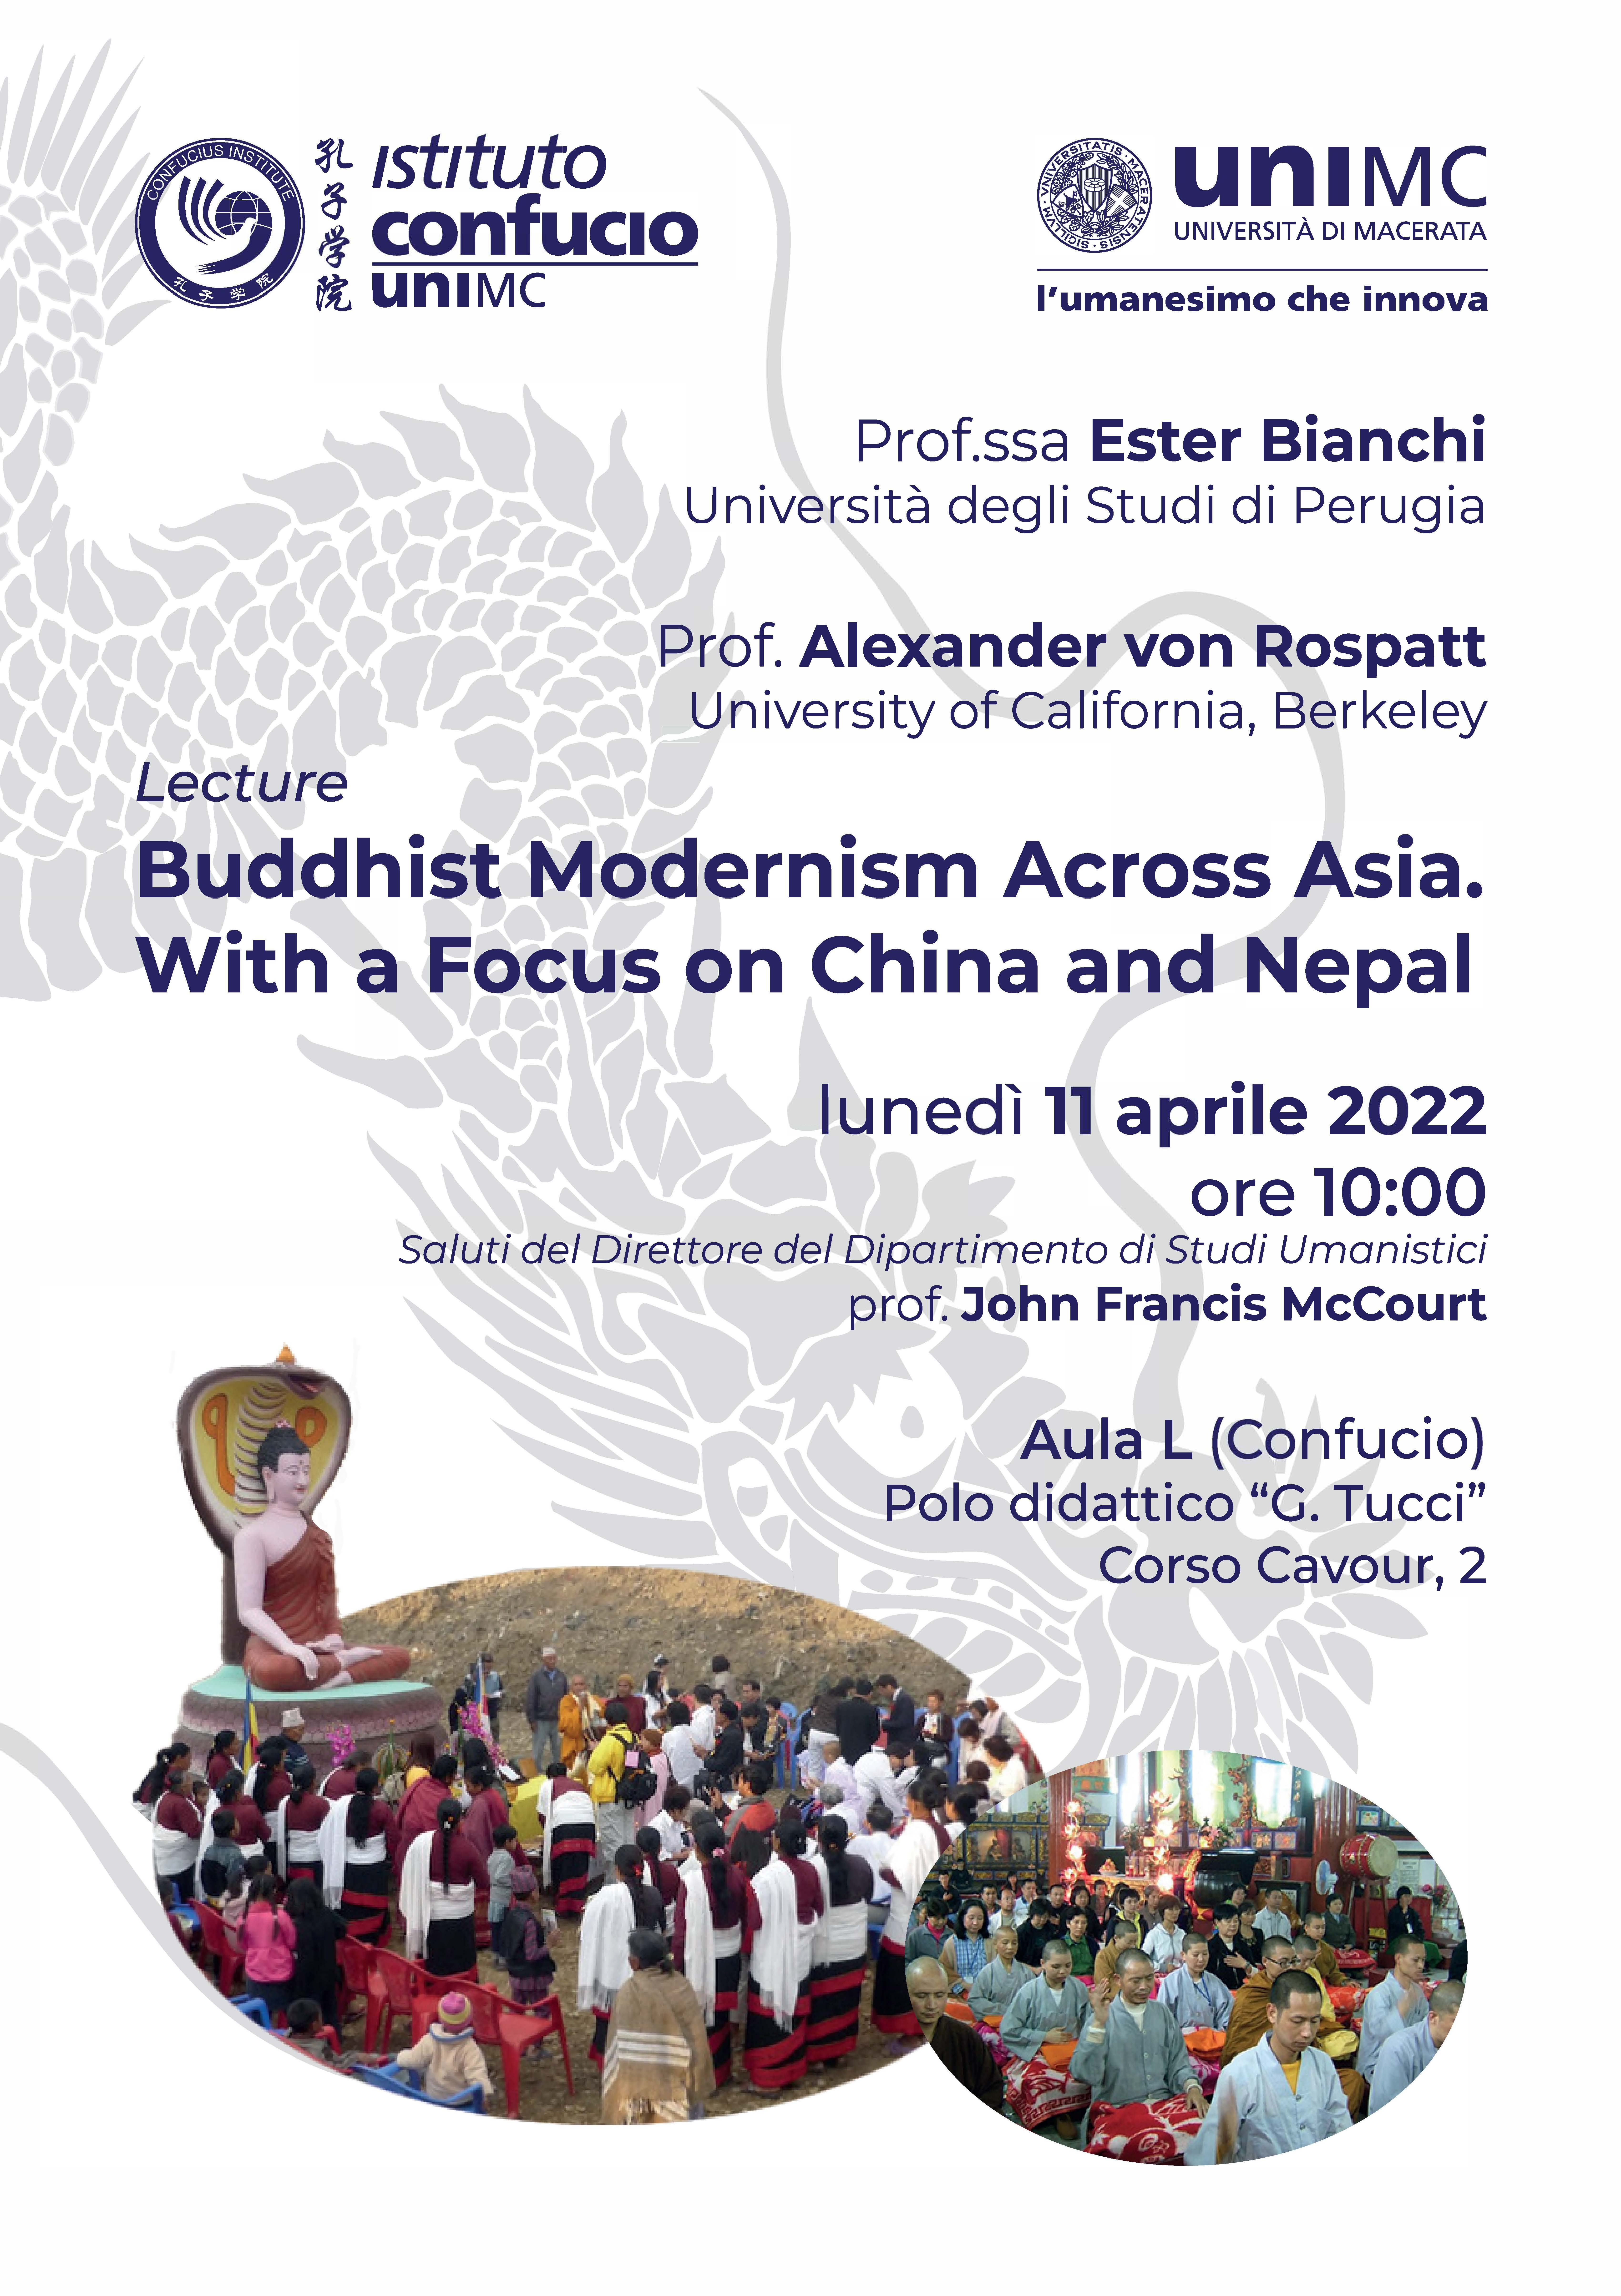 "Buddhist modernism across Asia. With a focus on China and Nepal" 